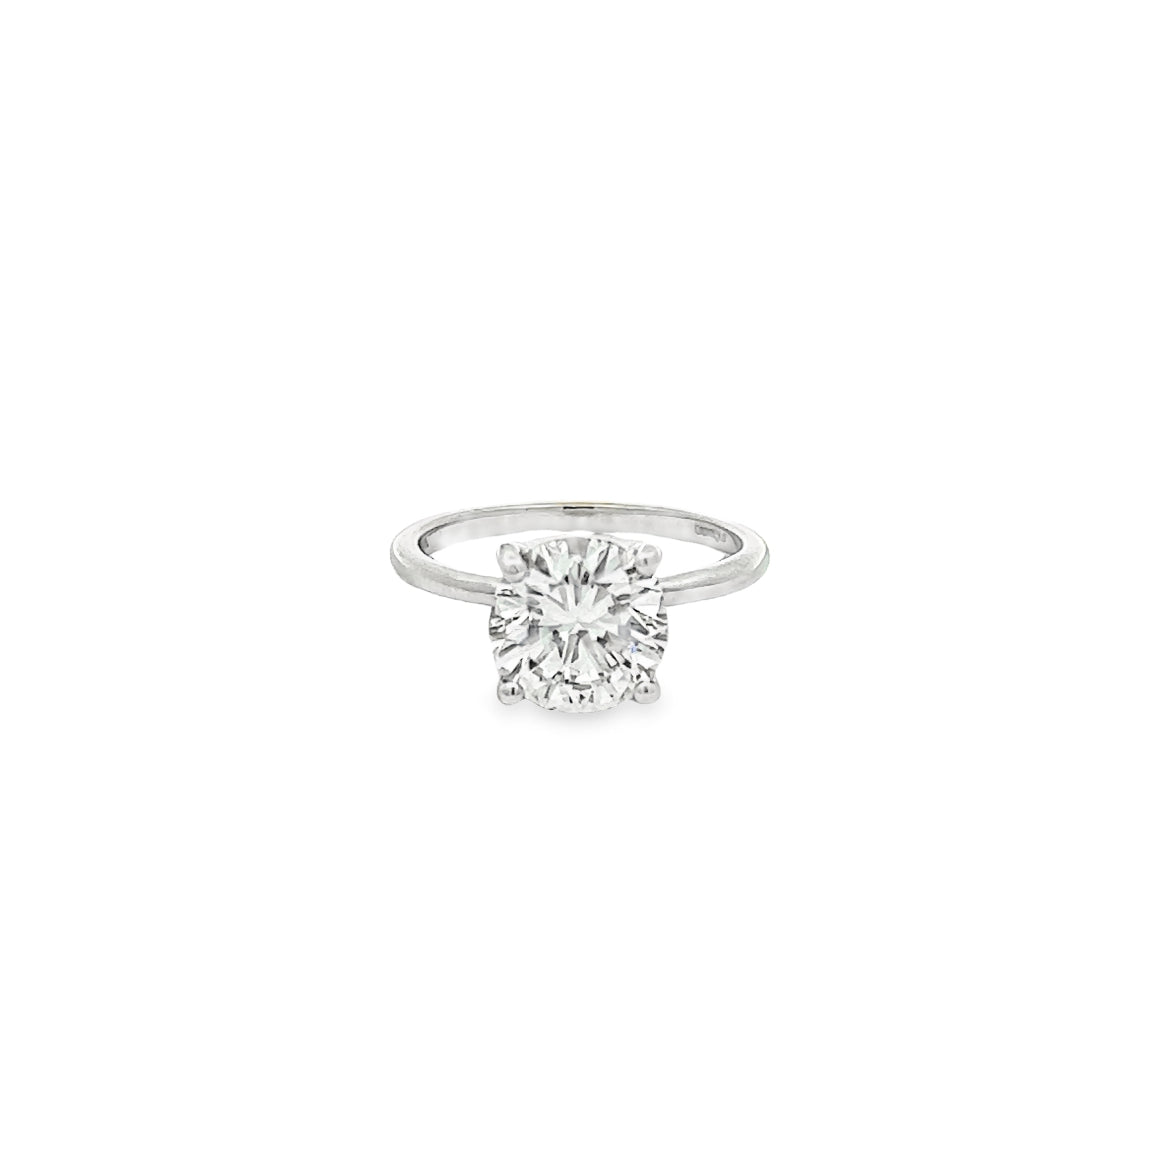 The 1974 18K White Gold Round Engagement Ring